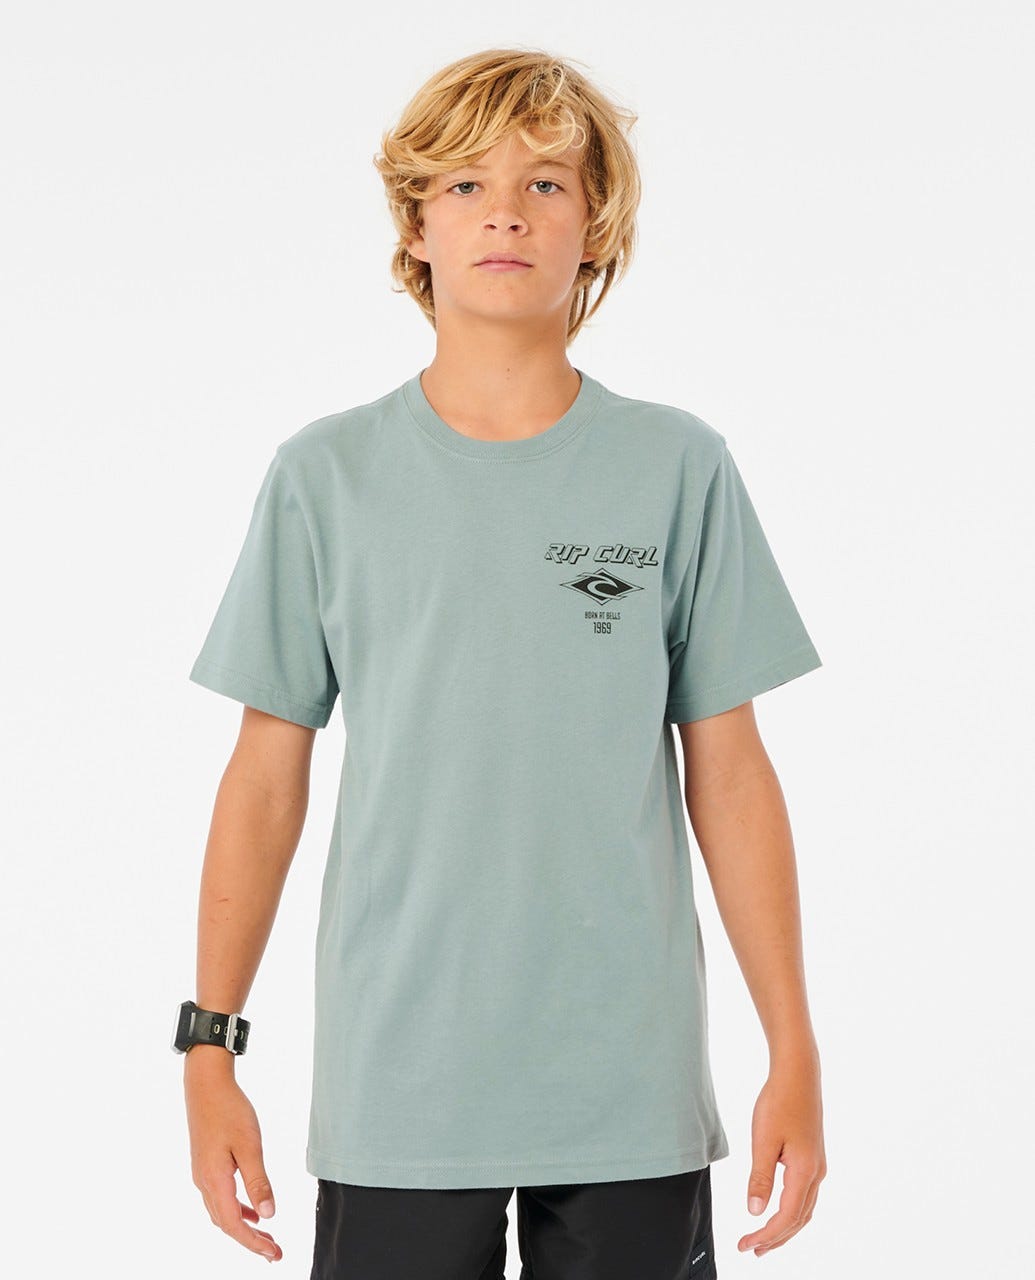 Rip Curl Fadeout Essential Tee - Boys (8 - 16 years) Washed clover